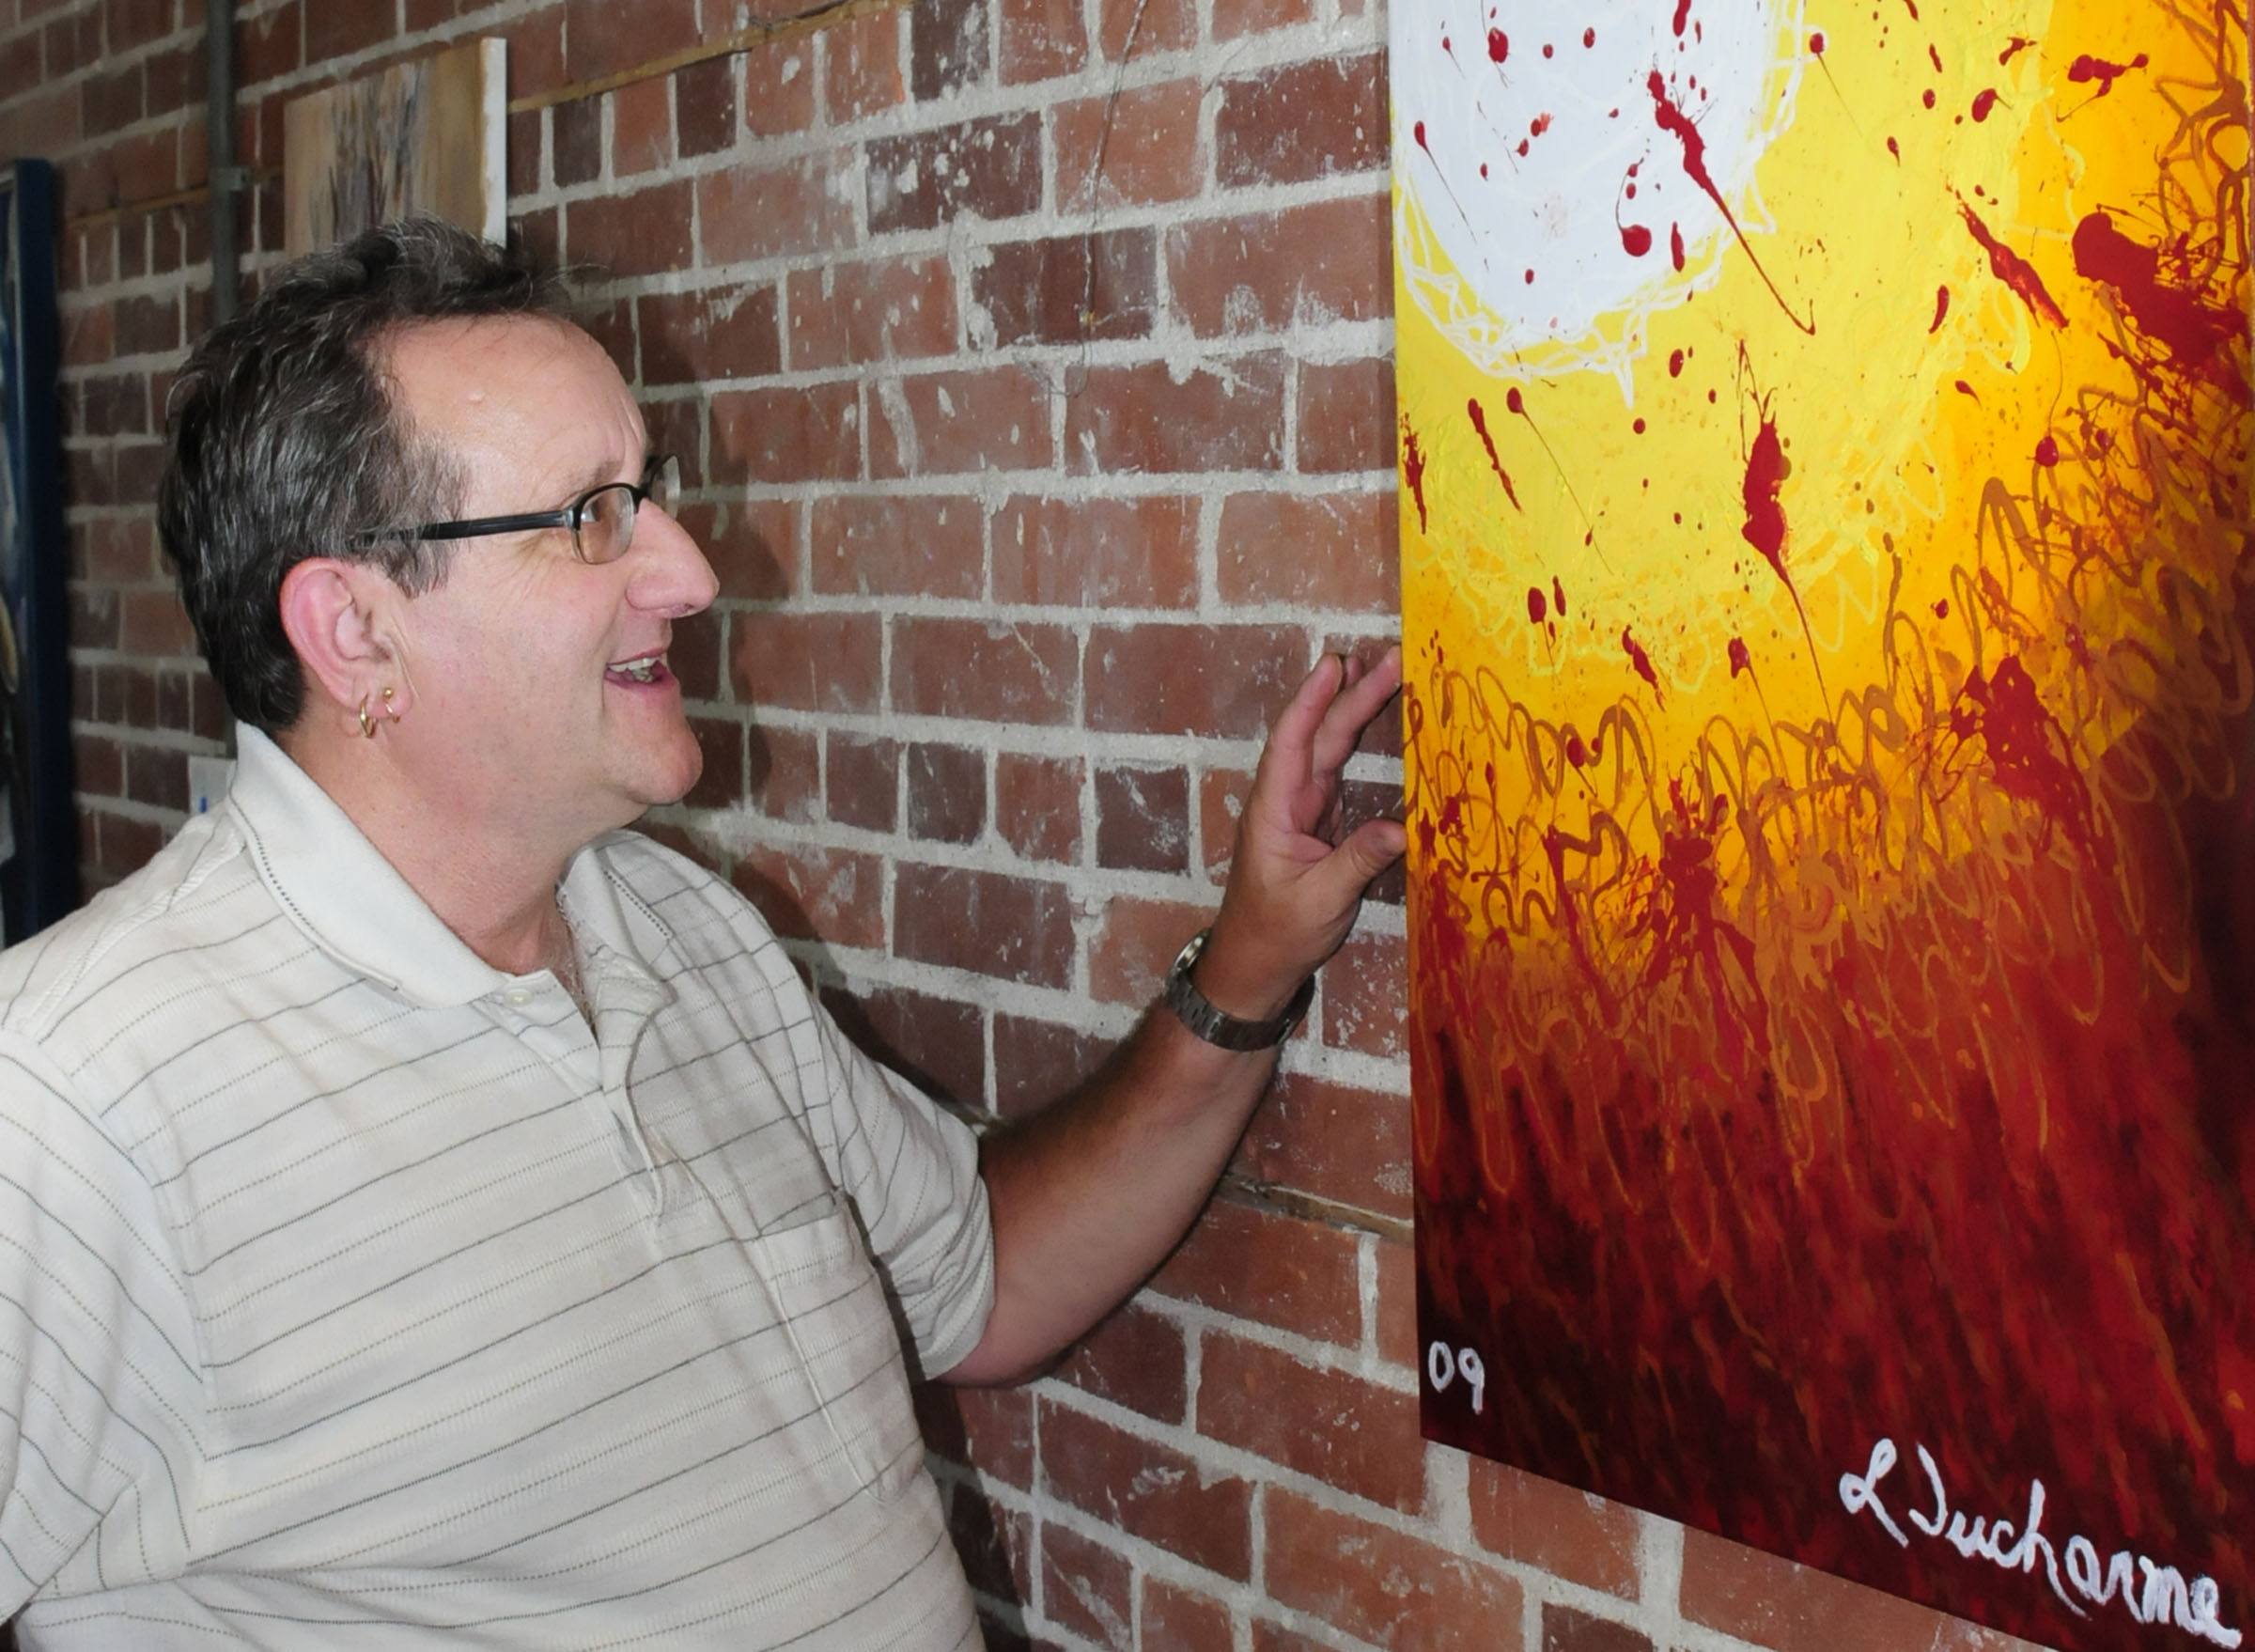 Red Deerian Leo Ducharme stands by one of his colourful creations depicting the sun. His work will be featured at The Loft on Gaetz during the month of August.